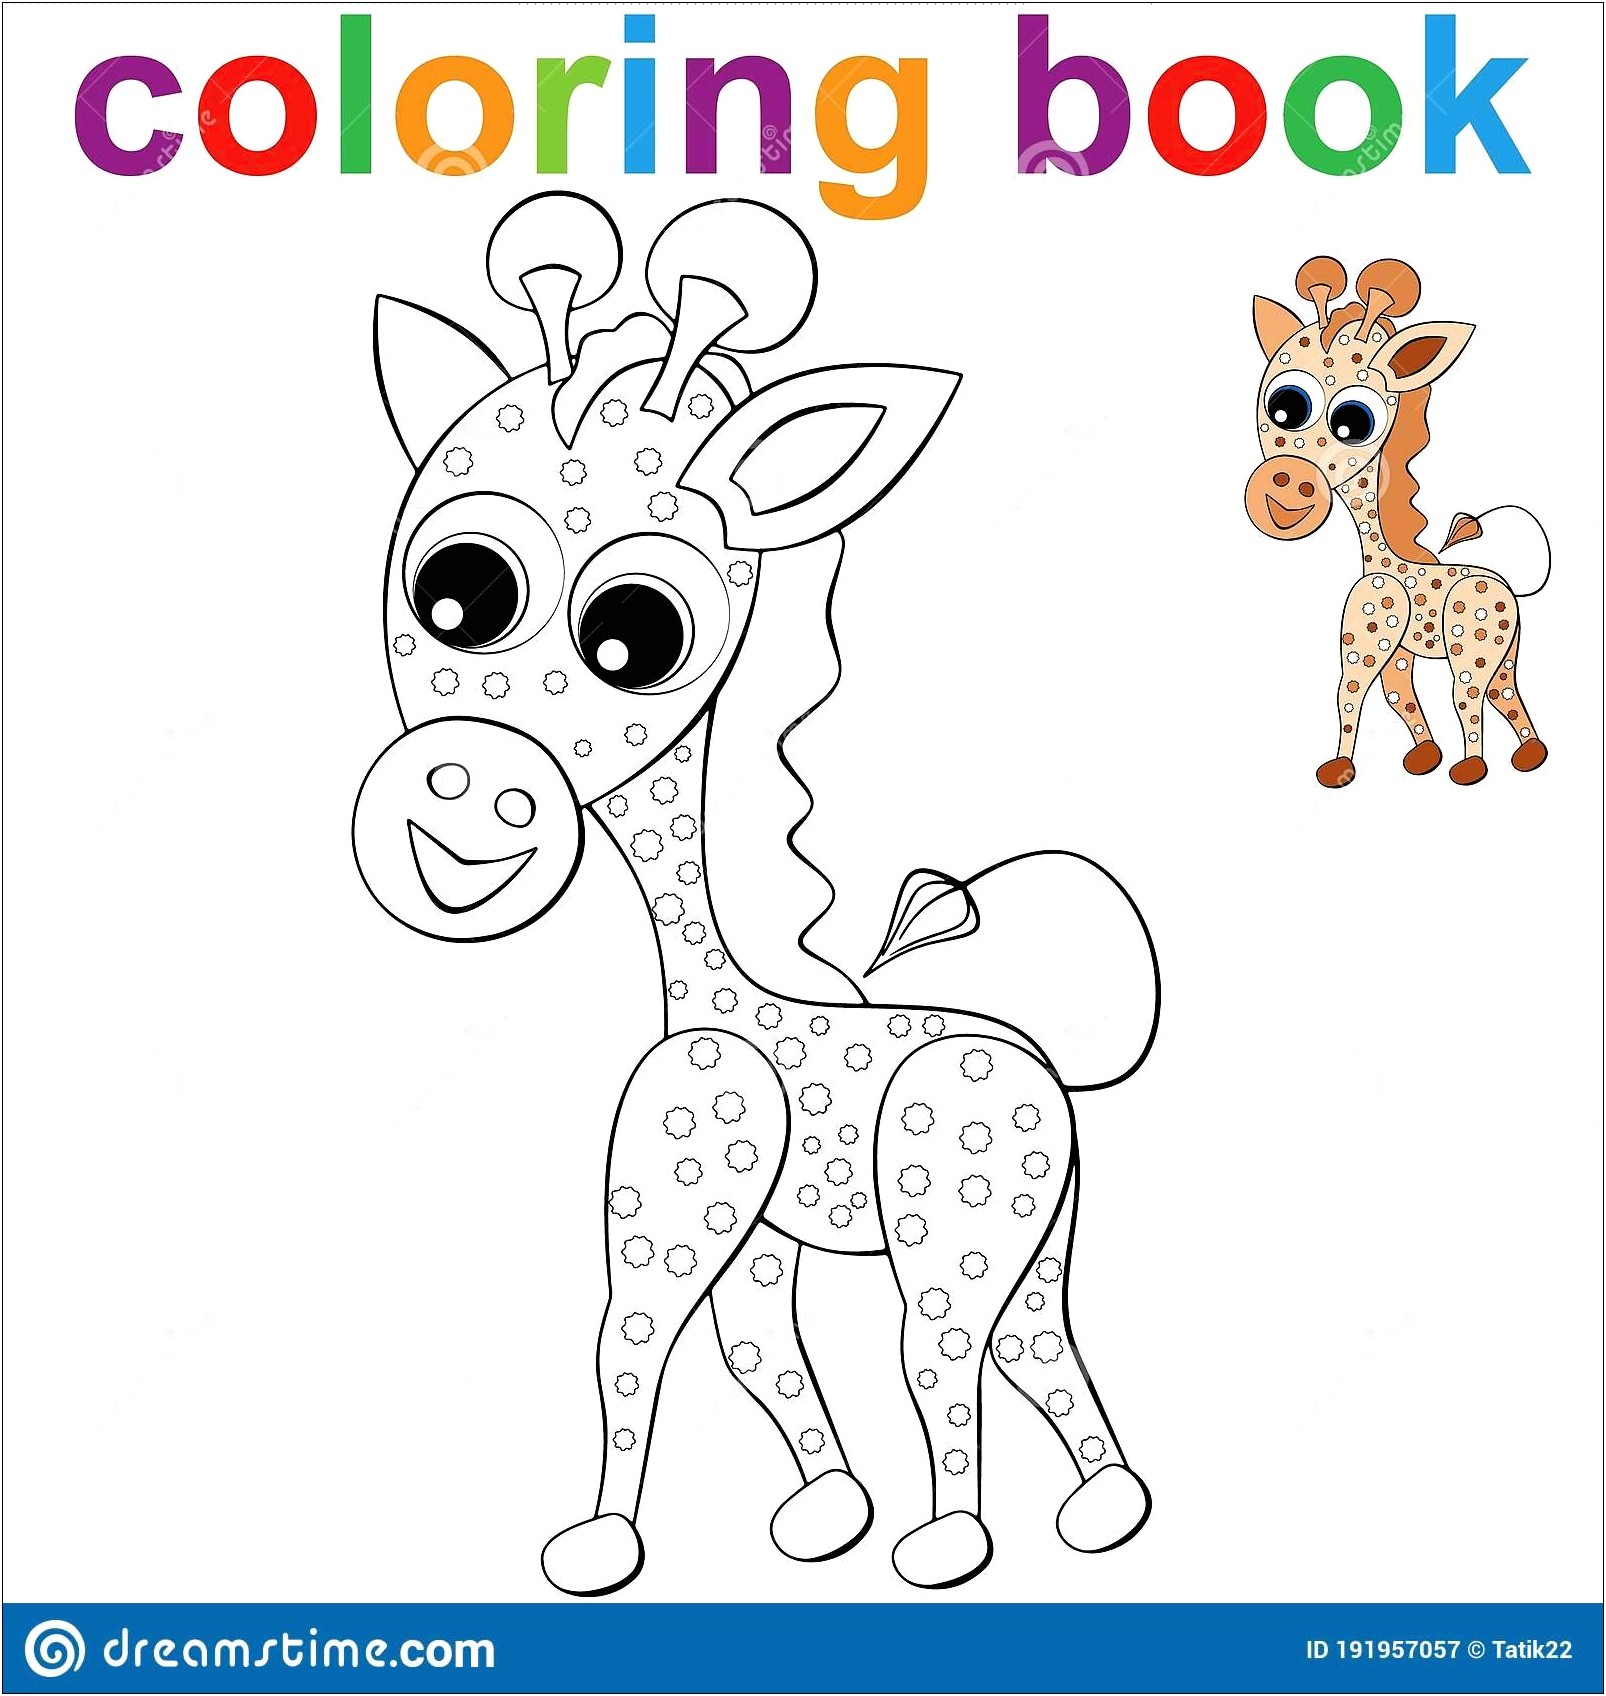 Free Template Of A Children's Coloring Book